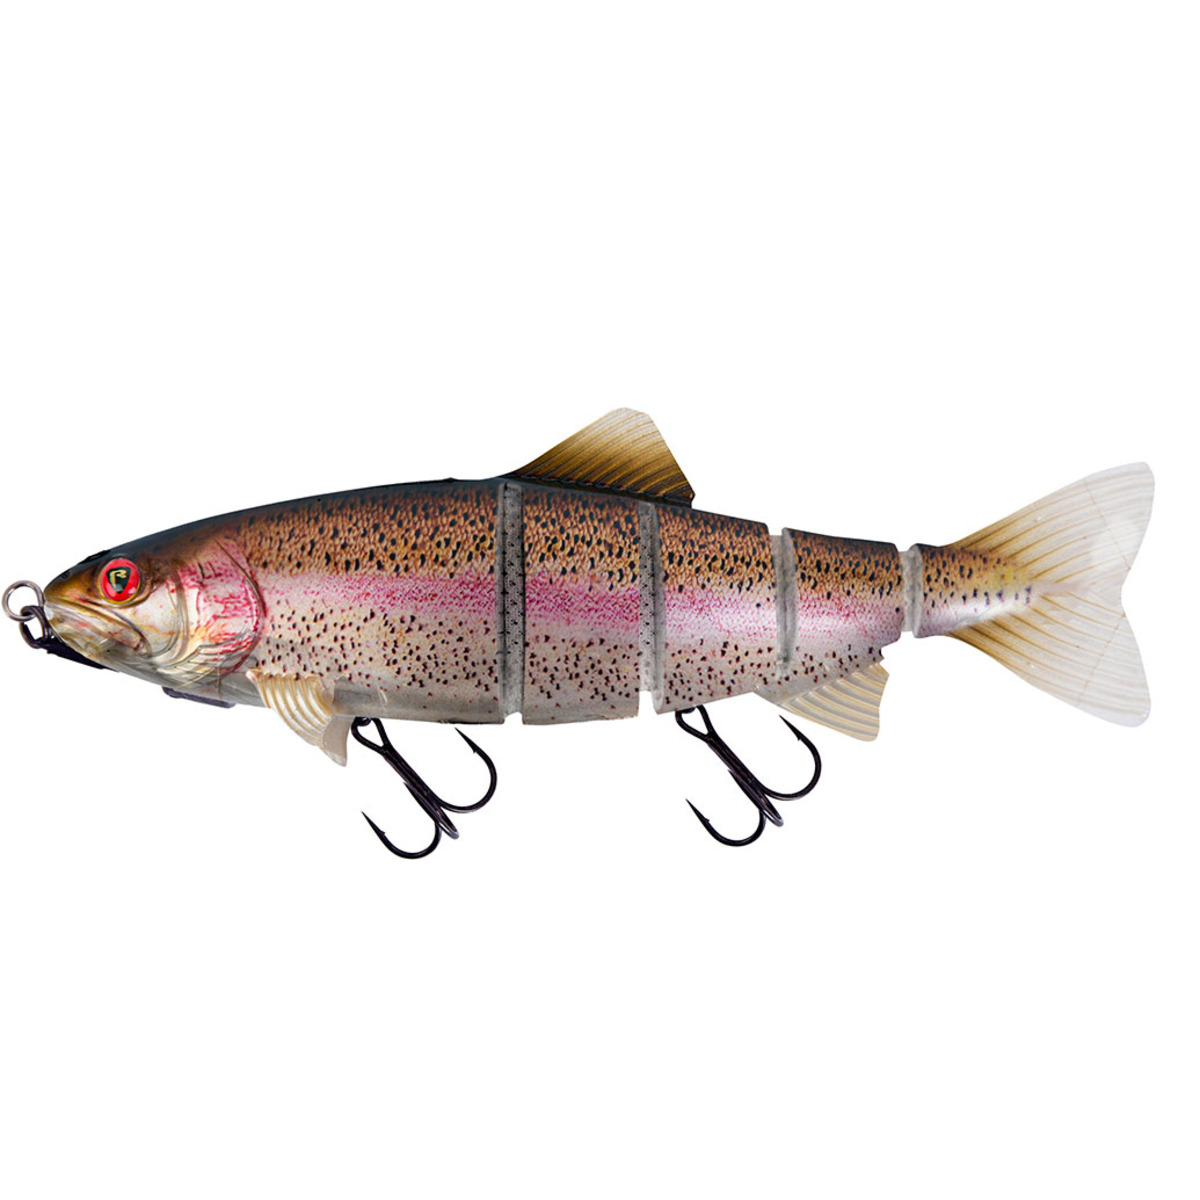 Fox Rage Replicant Realistic Trout Jointed Shallow 14  Cm / 5.5  40 G - Super Natural Rainbow Trout